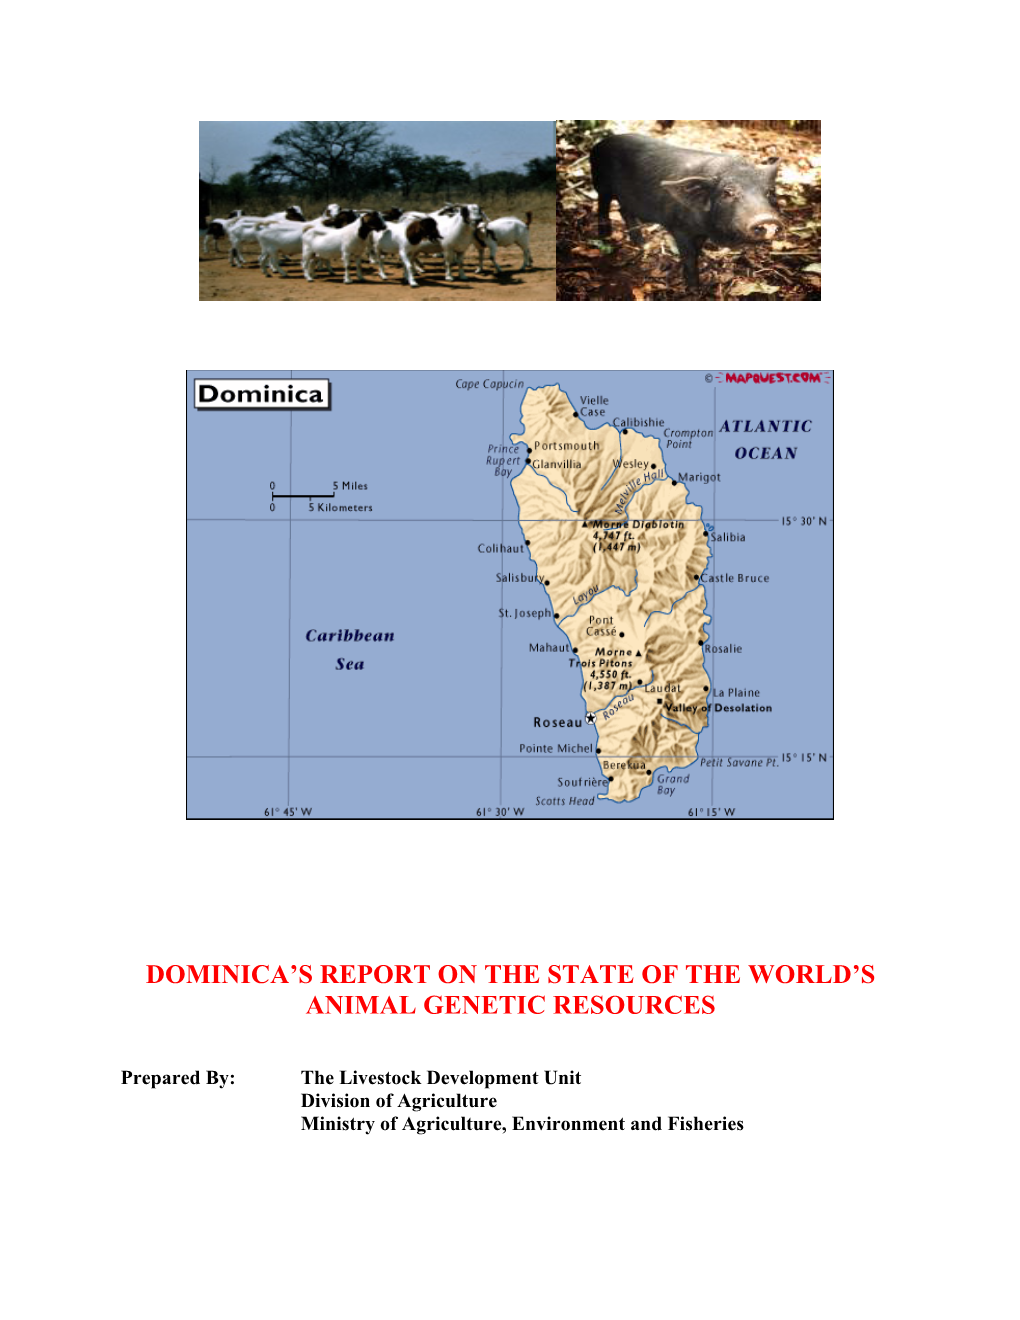 Dominica's Report on the State of the World's Animal Genetic Resources